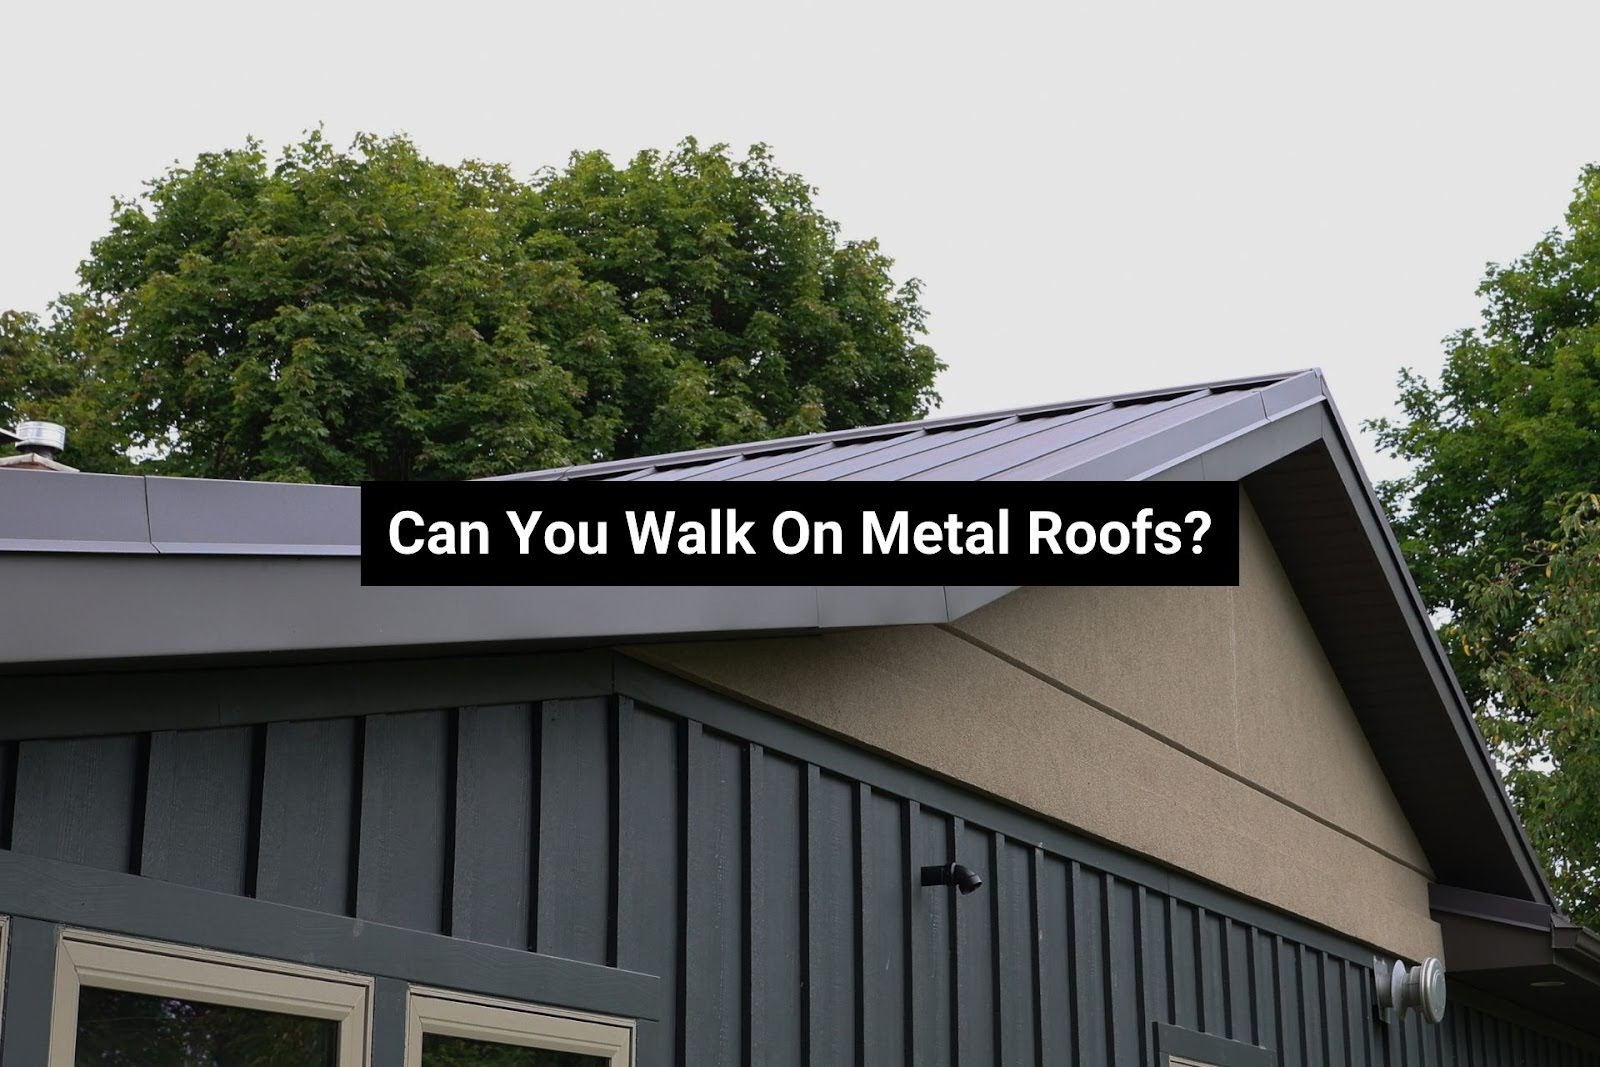 Can you walk on a metal roof?